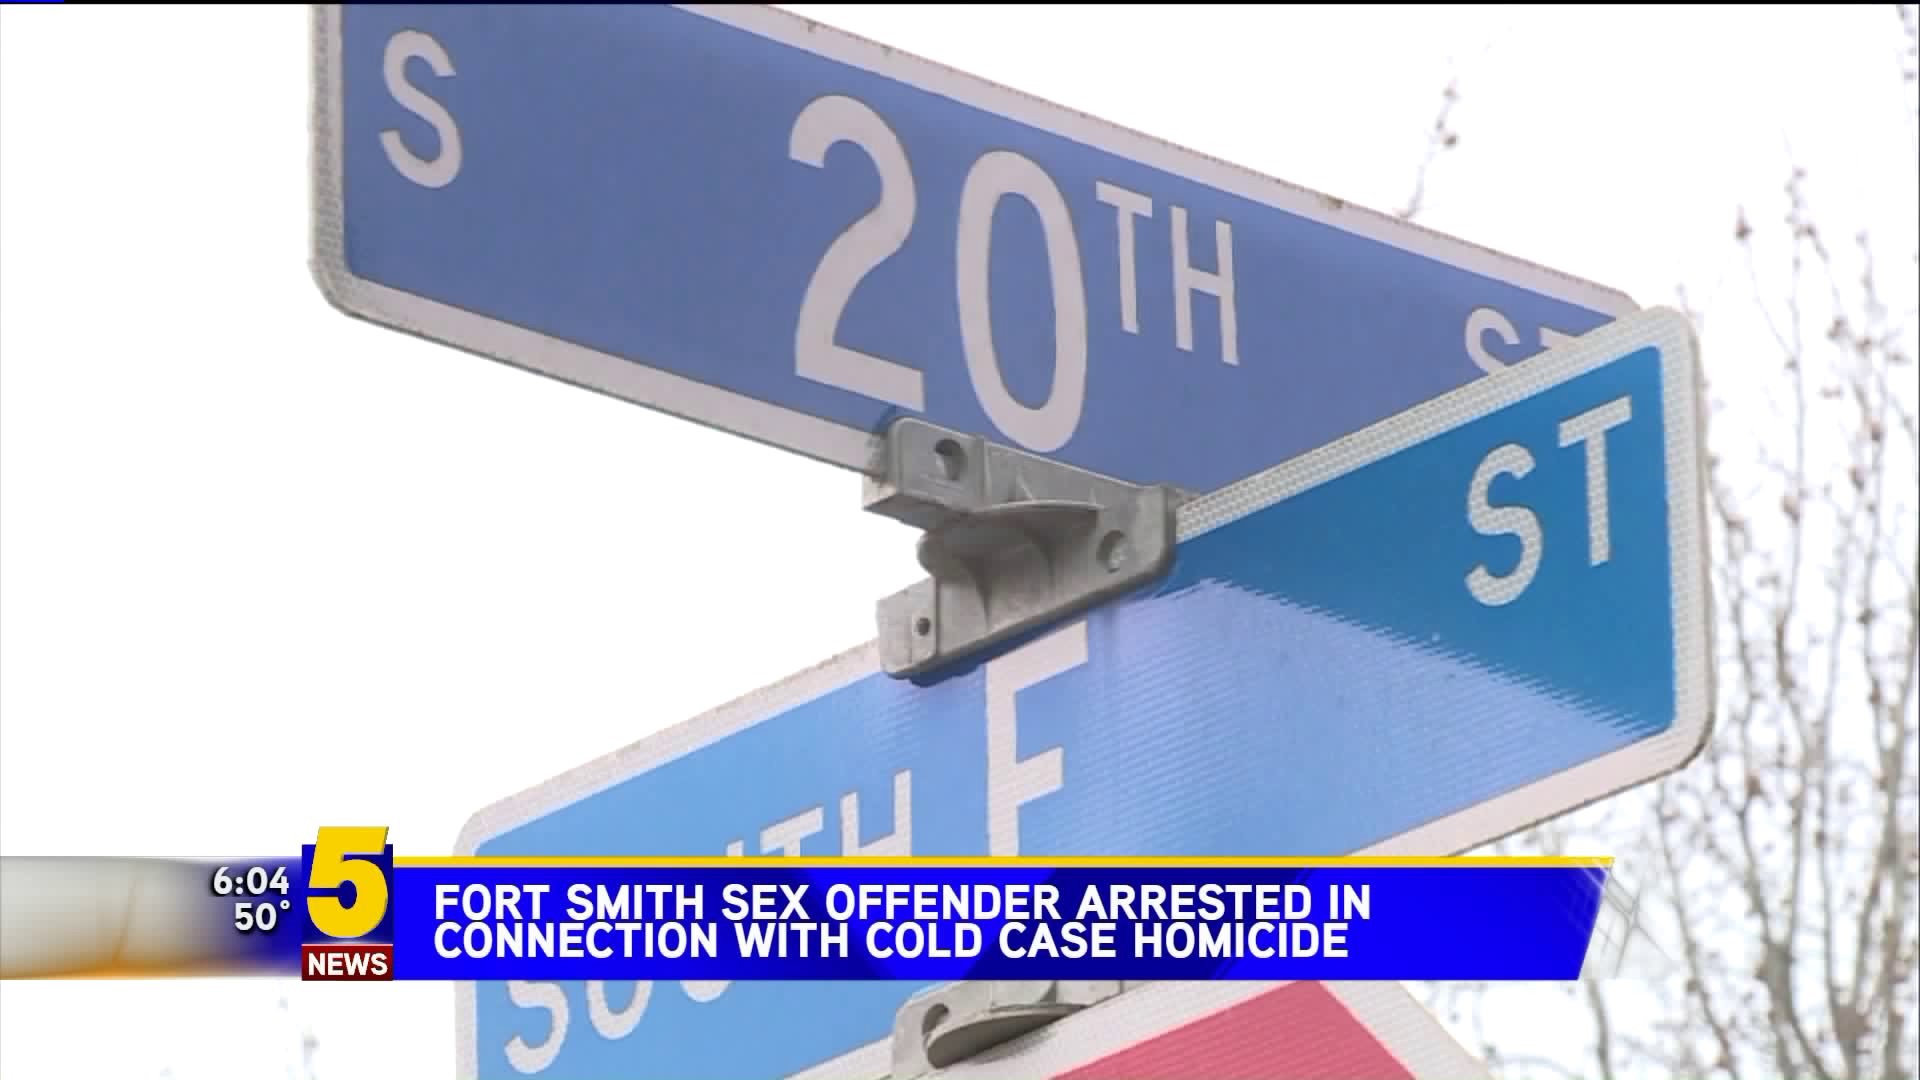 Fort Smith Sex Offender Arrested In Connection To Homicide Case